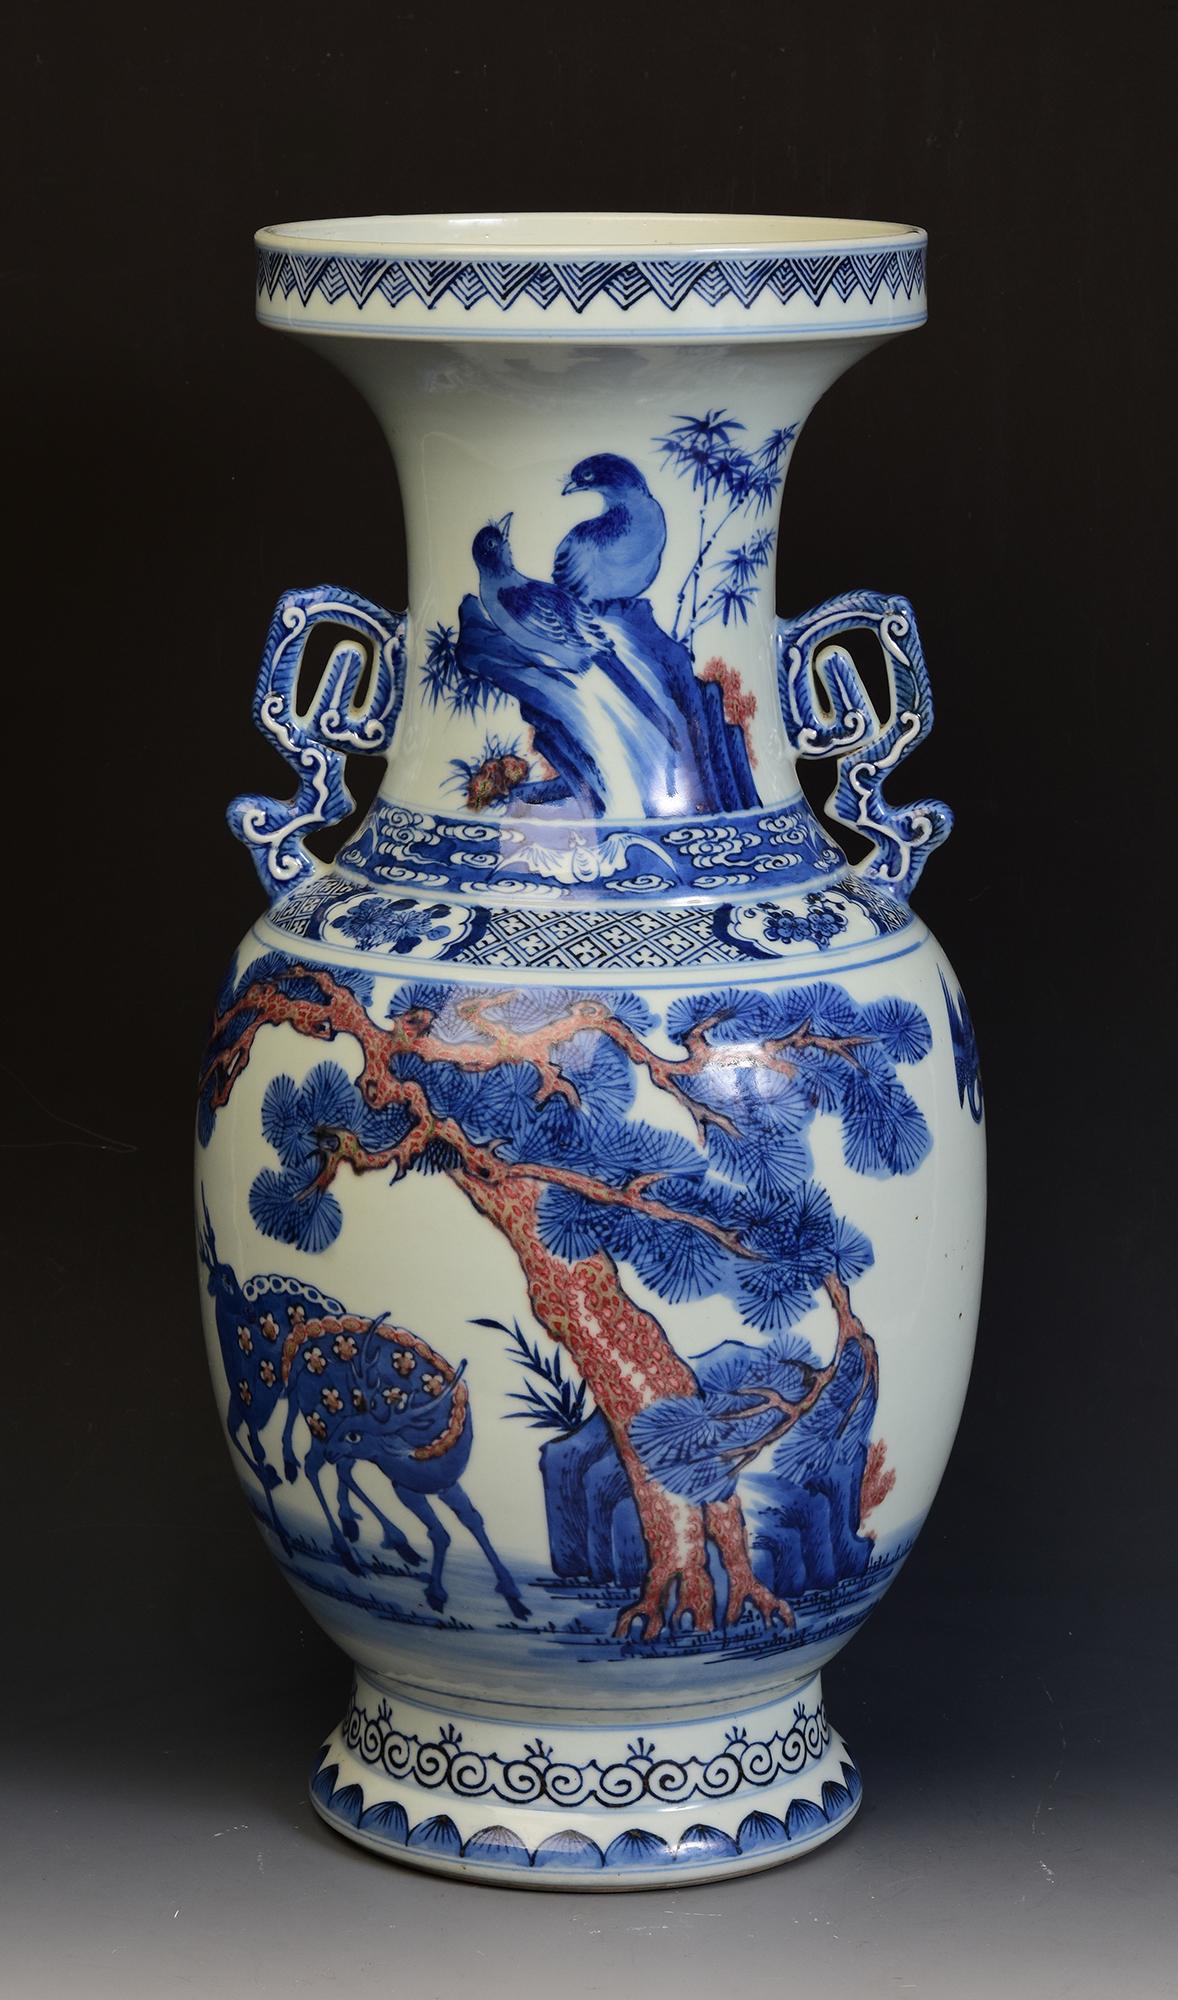 Antique Chinese porcelain vase.

Age: China, Qing Dynasty, 19th Century
Size: Height 46.8 C.M. / Width 22 C.M.
Condition: Nice glaze and condition overall.

100% Satisfaction and authenticity guaranteed with free 